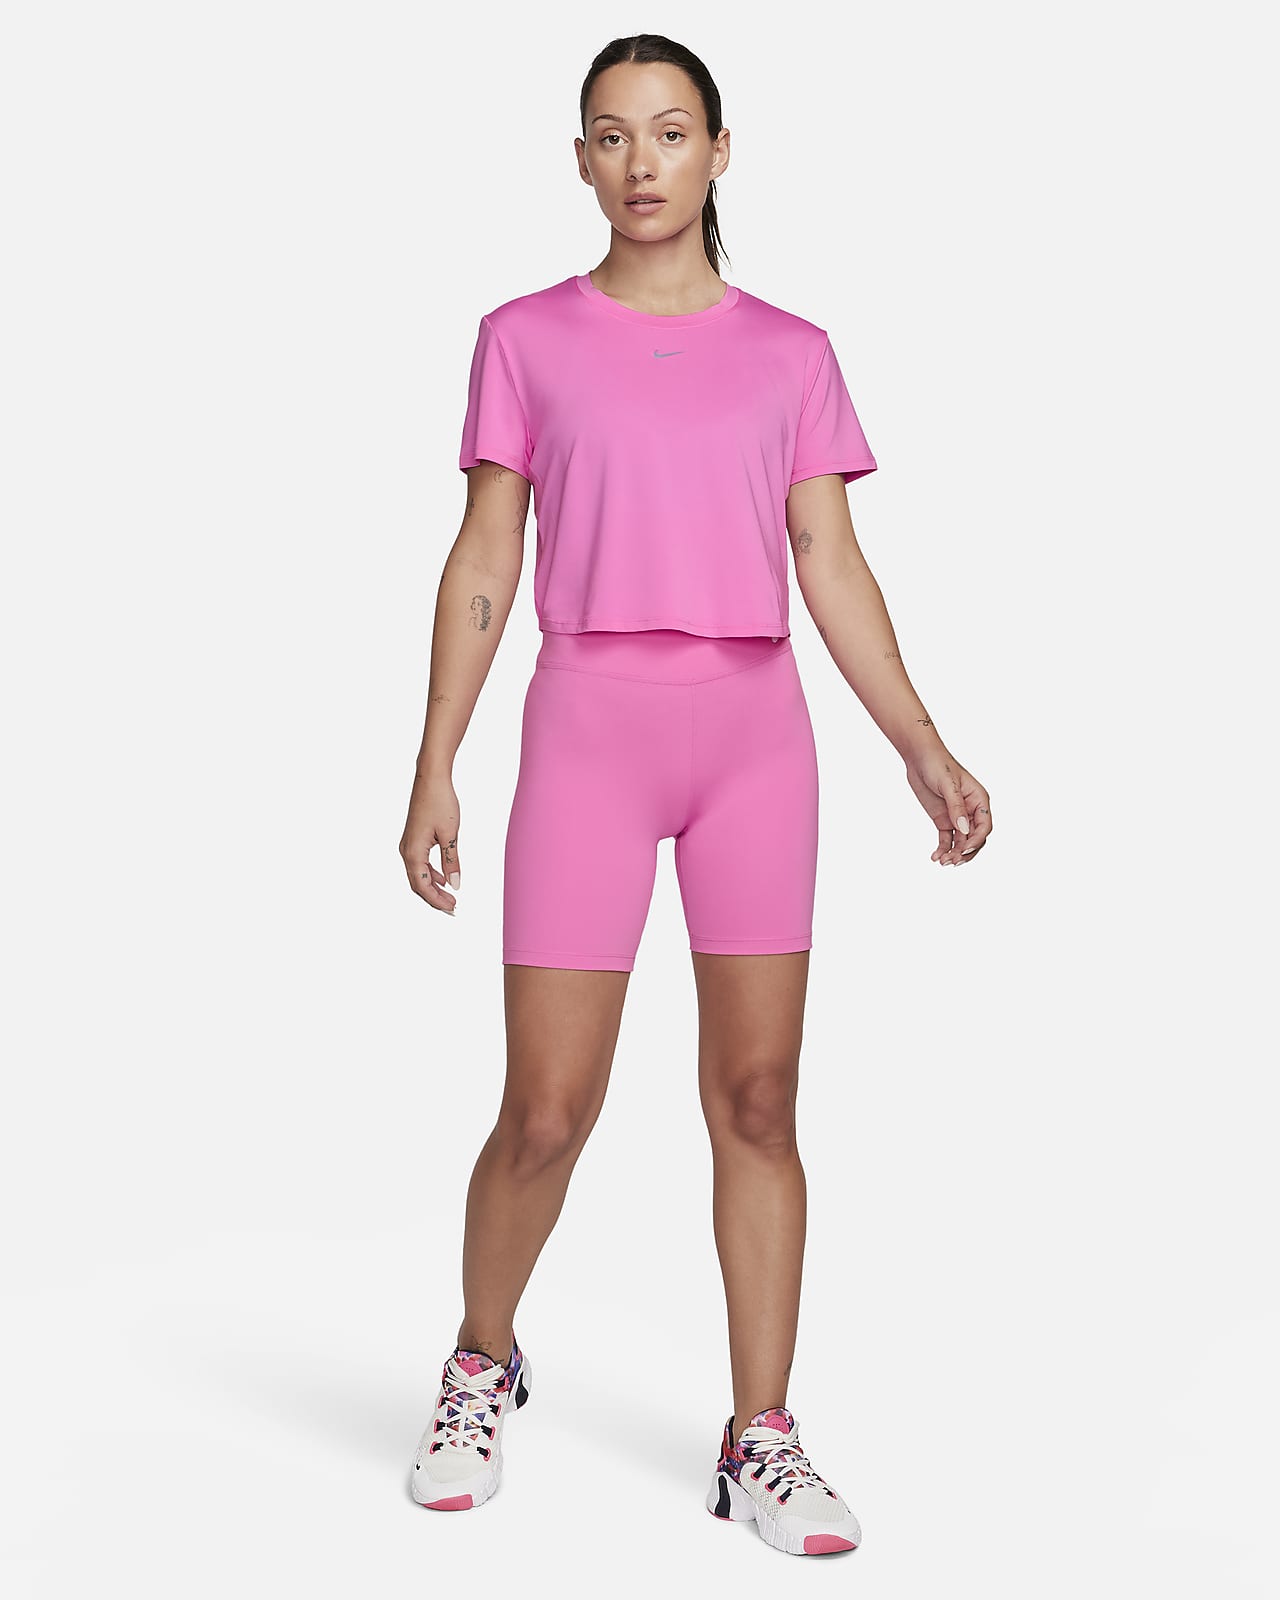 https://static.nike.com/a/images/t_PDP_1280_v1/f_auto,q_auto:eco/f6cab0c4-db86-46e9-bd9c-48f0de9ac3d9/one-classic-womens-dri-fit-short-sleeve-cropped-top-H4198j.png